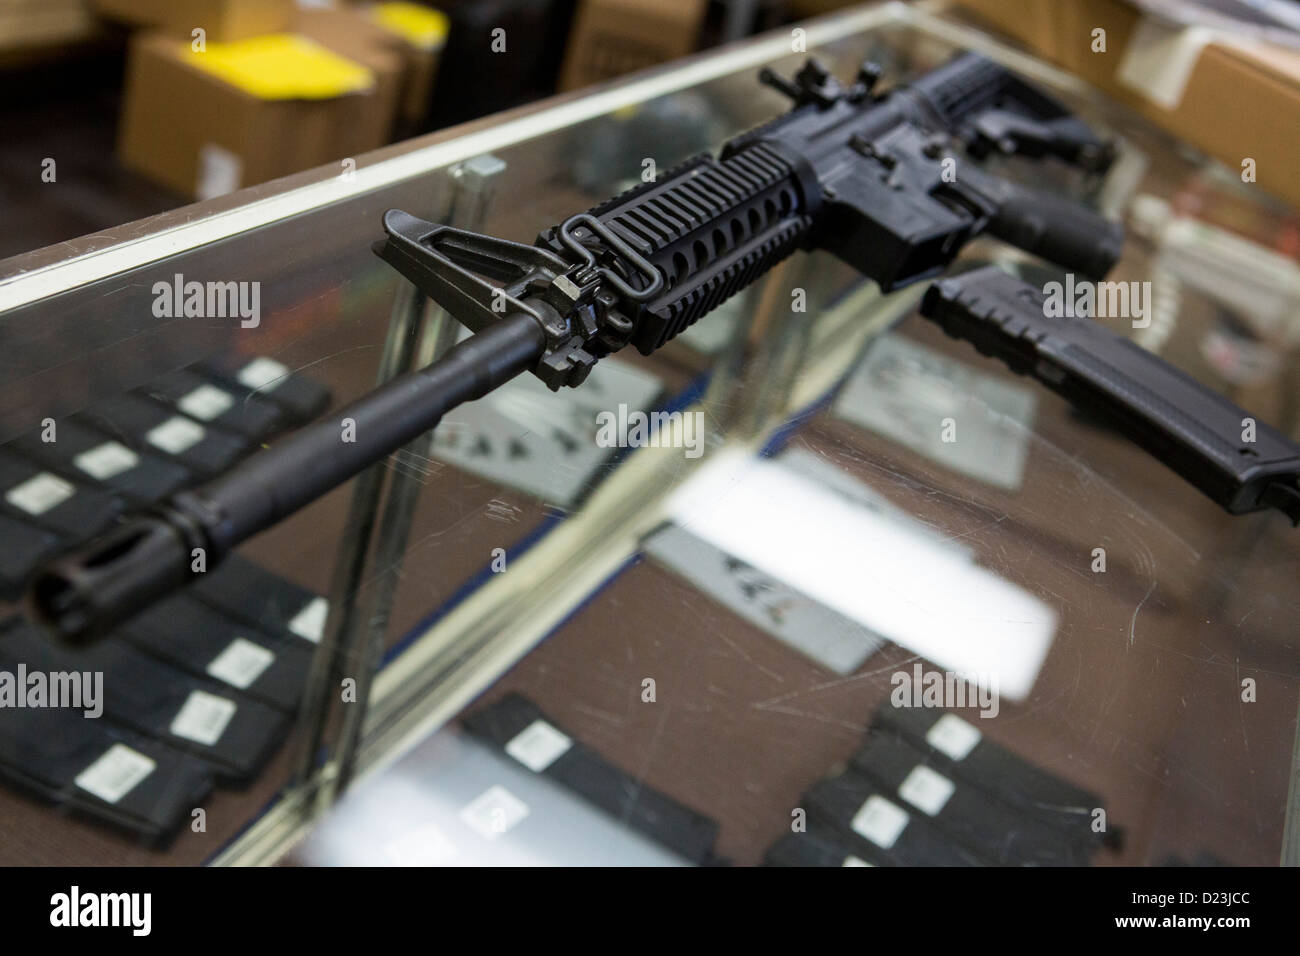 A Colt Defense M4A1 Carbine assault rifle on display at a gun shop with high capacity 30 round magazines.  Stock Photo